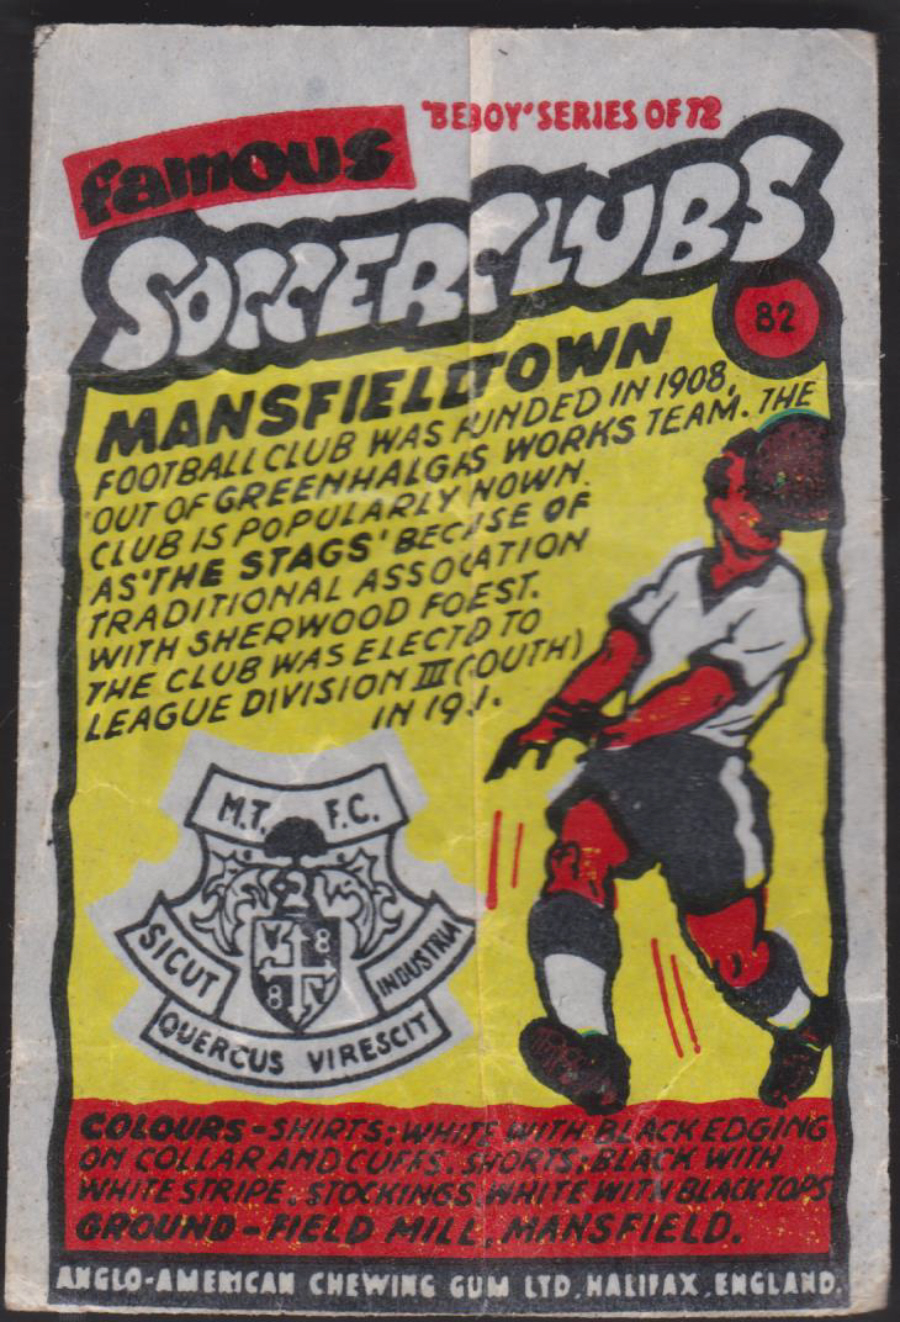 Anglo-American-Chewing-Gum-Wax-Wrapper-Famous-Soccer-Clubs-No-82 - Mansfield Town - Click Image to Close